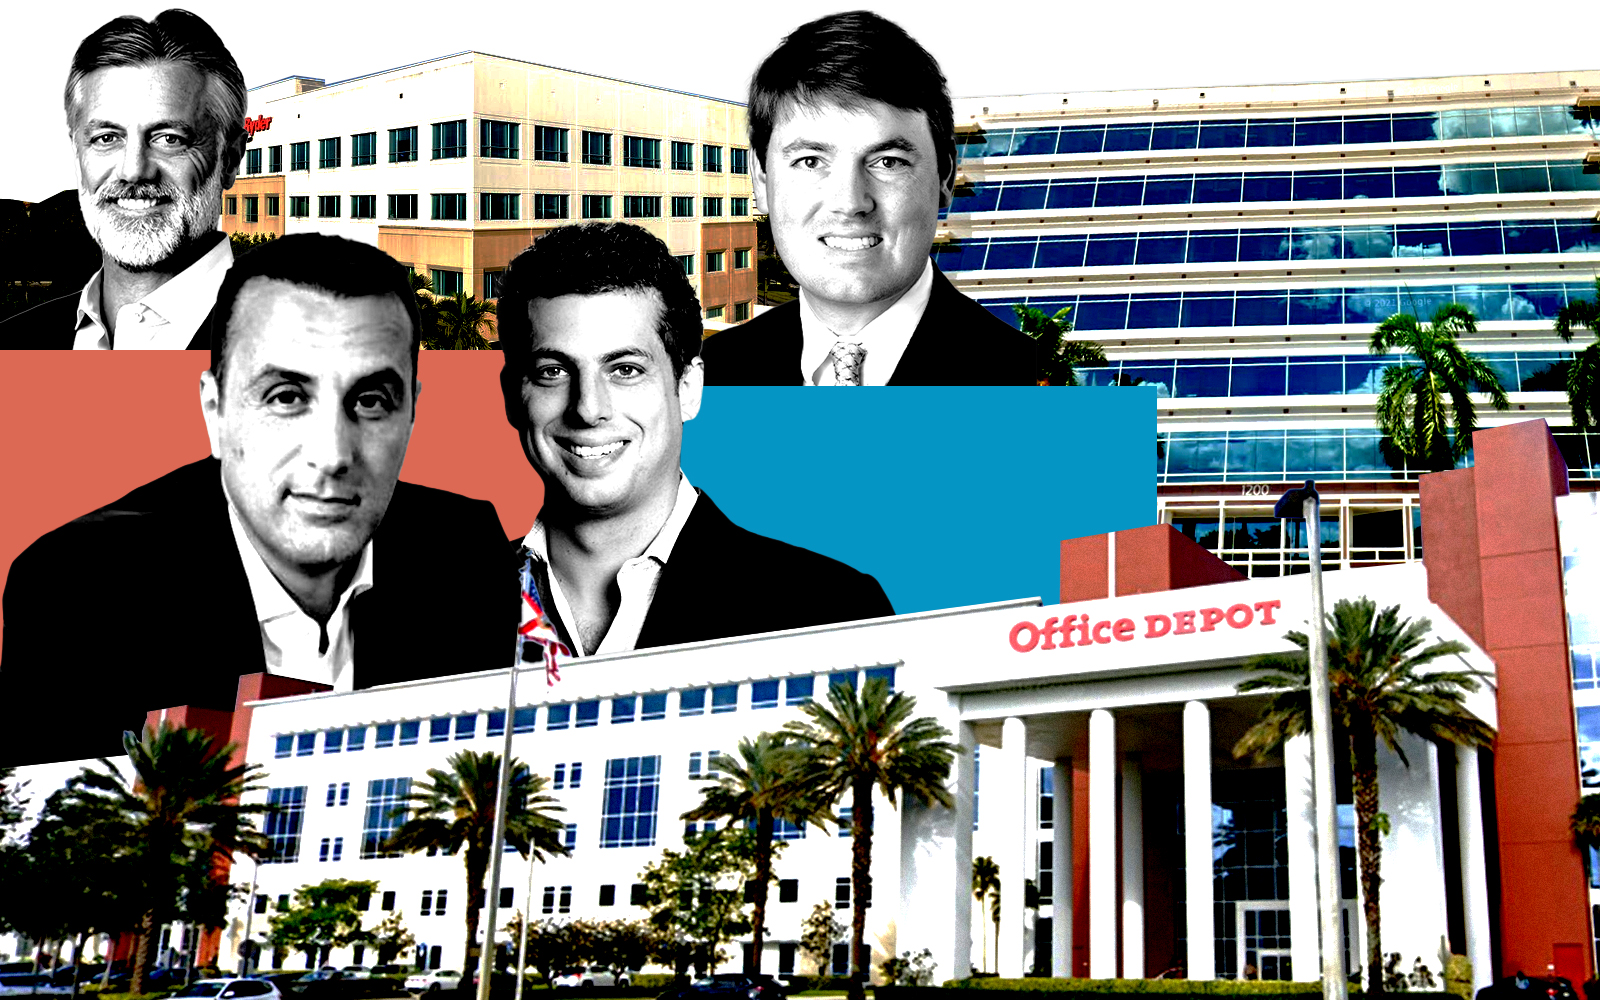 From left: Bridge Industrial’s Steve Poulos with 11690 Northwest 105th Street in Miami-Dade County; BH Group’s Issac Toledano and Pebb Enterprises’ Ian Weiner with Office Depot headquarters at 6600 North Military Trail in Boca Raton (Getty, Google Maps, Bridge Industrial, BH Group, Pebb Enterprises)